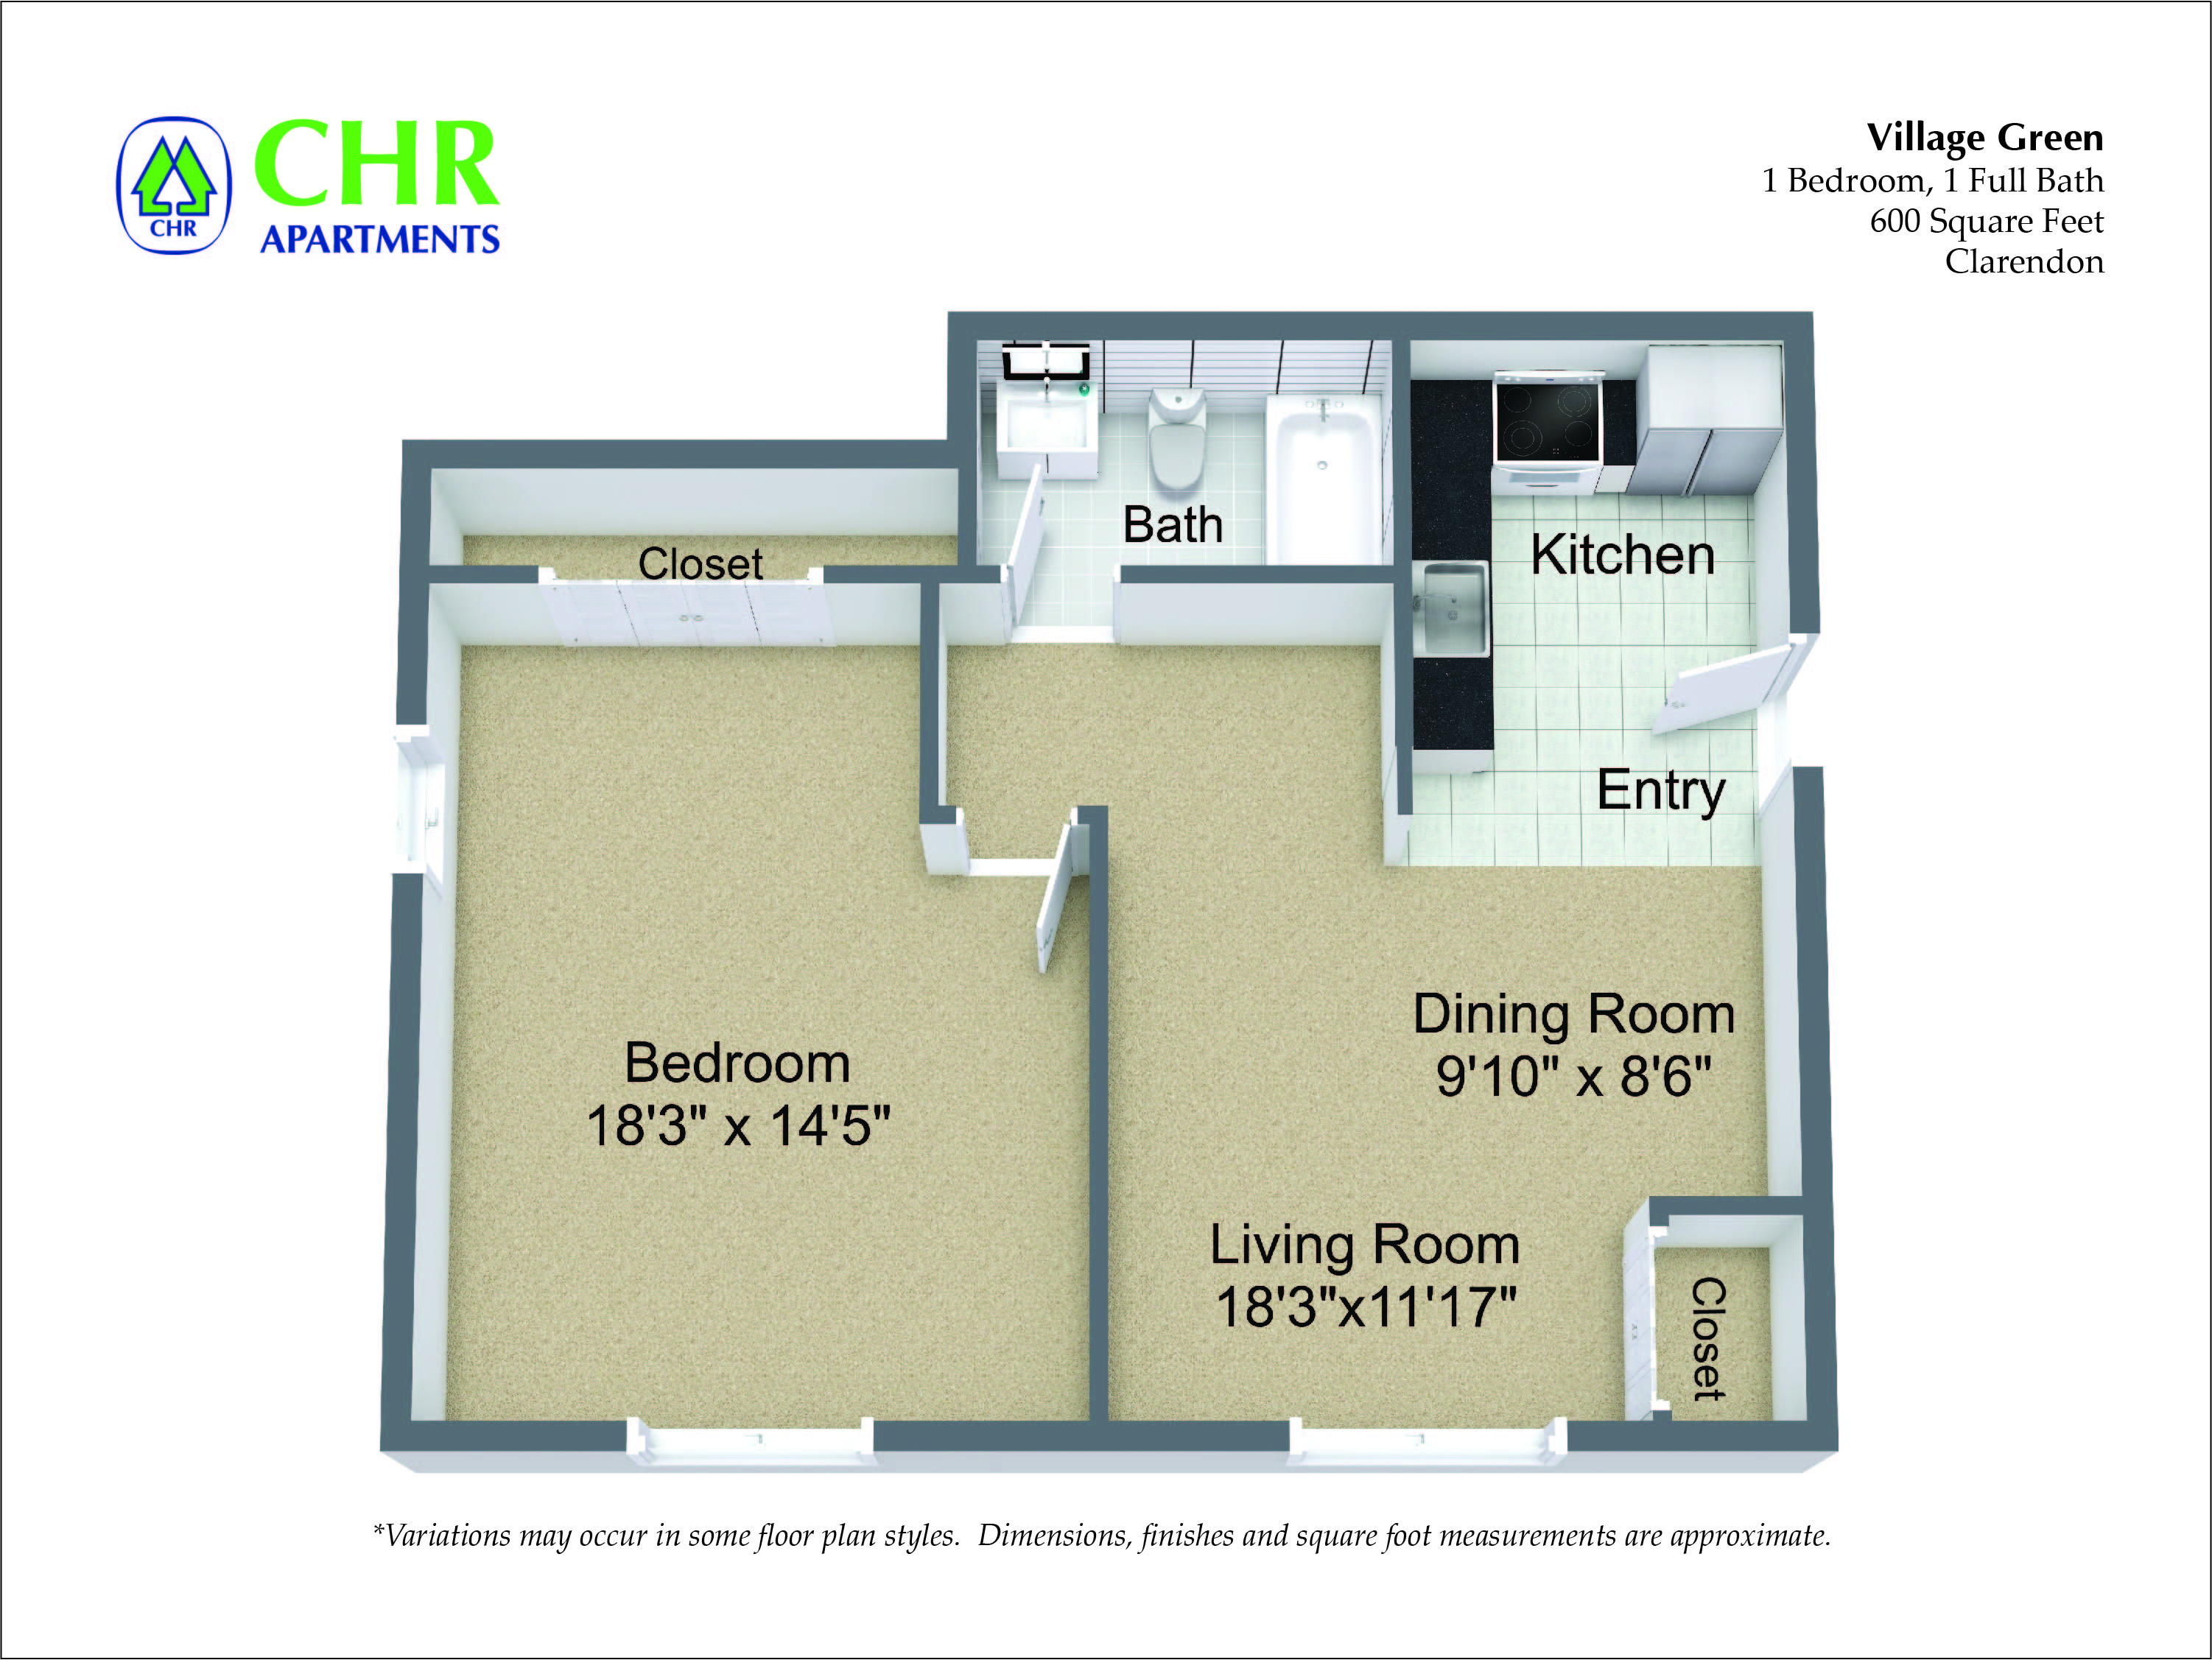 Click to view 1 Bed/1 Bath floor plan gallery